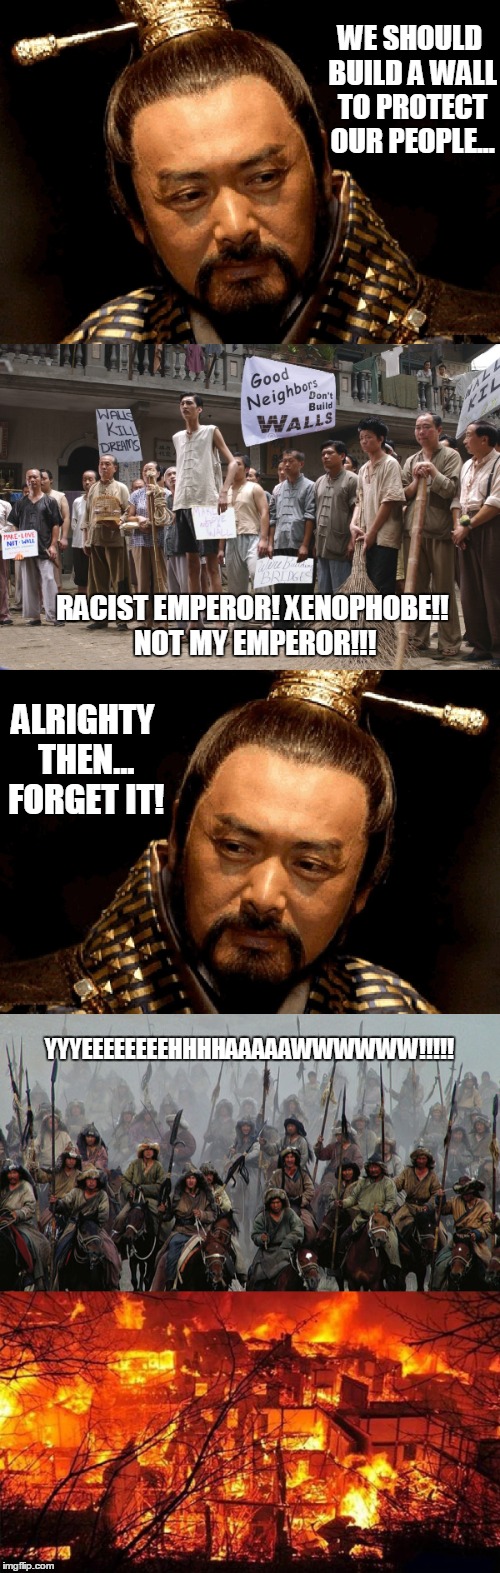 Why lions do not care for the opinion of sheep. | WE SHOULD BUILD A WALL TO PROTECT OUR PEOPLE... RACIST EMPEROR! XENOPHOBE!! NOT MY EMPEROR!!! ALRIGHTY THEN... FORGET IT! YYYEEEEEEEEHHHHAAAAAWWWWWW!!!!! | image tagged in liberal,idiots,wall,china,mongol | made w/ Imgflip meme maker